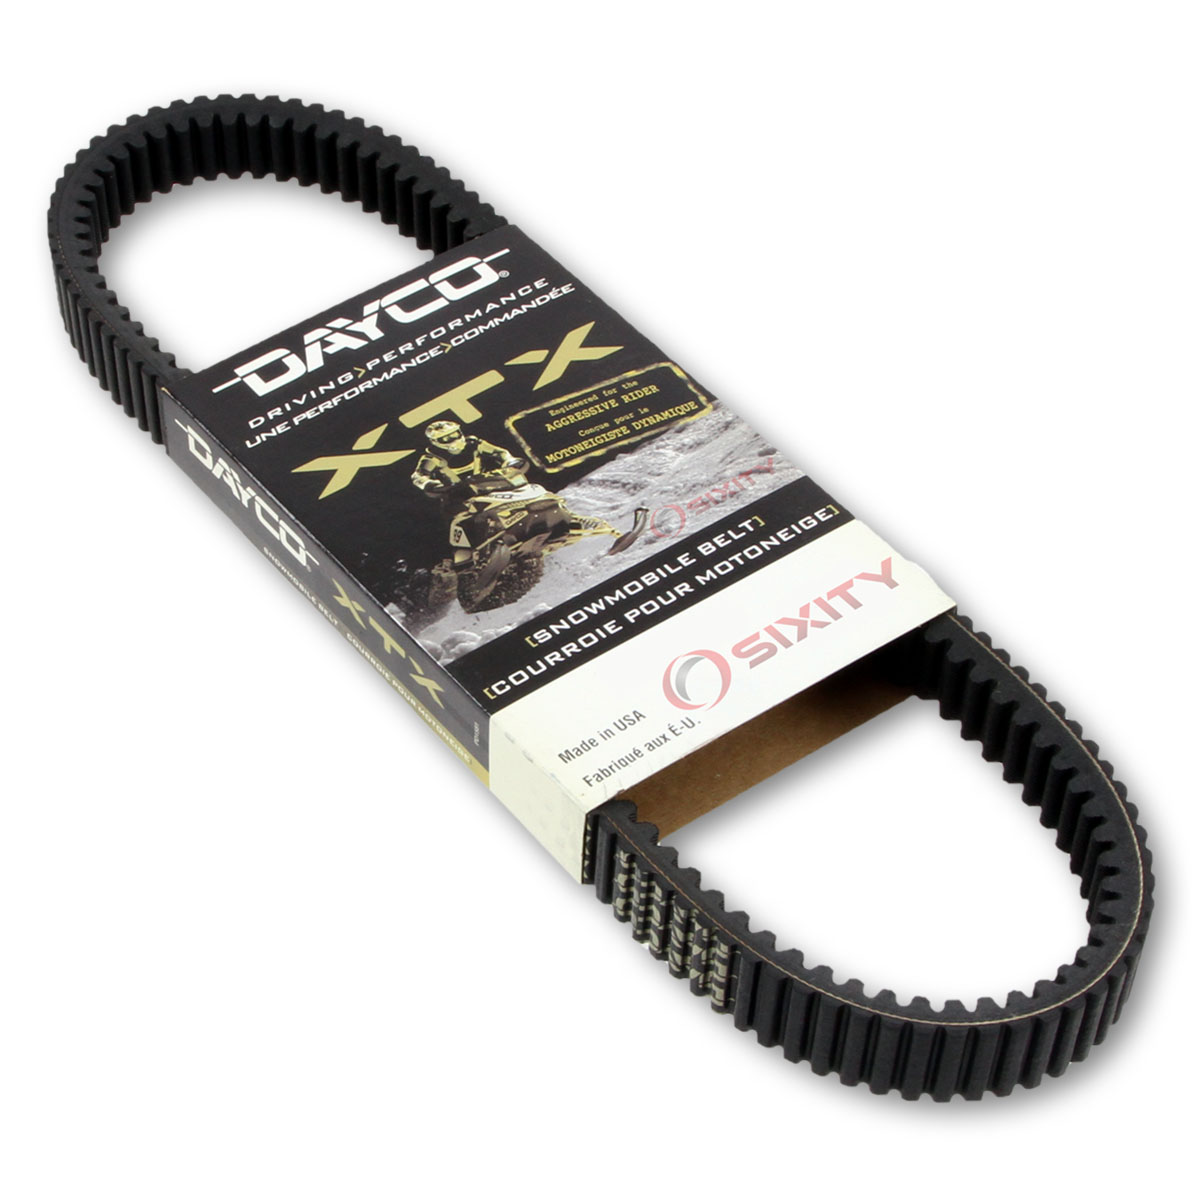 Dayco XTX Drive Belt for 2002 Arctic Cat 4-Stroke Touring - Extreme Torque